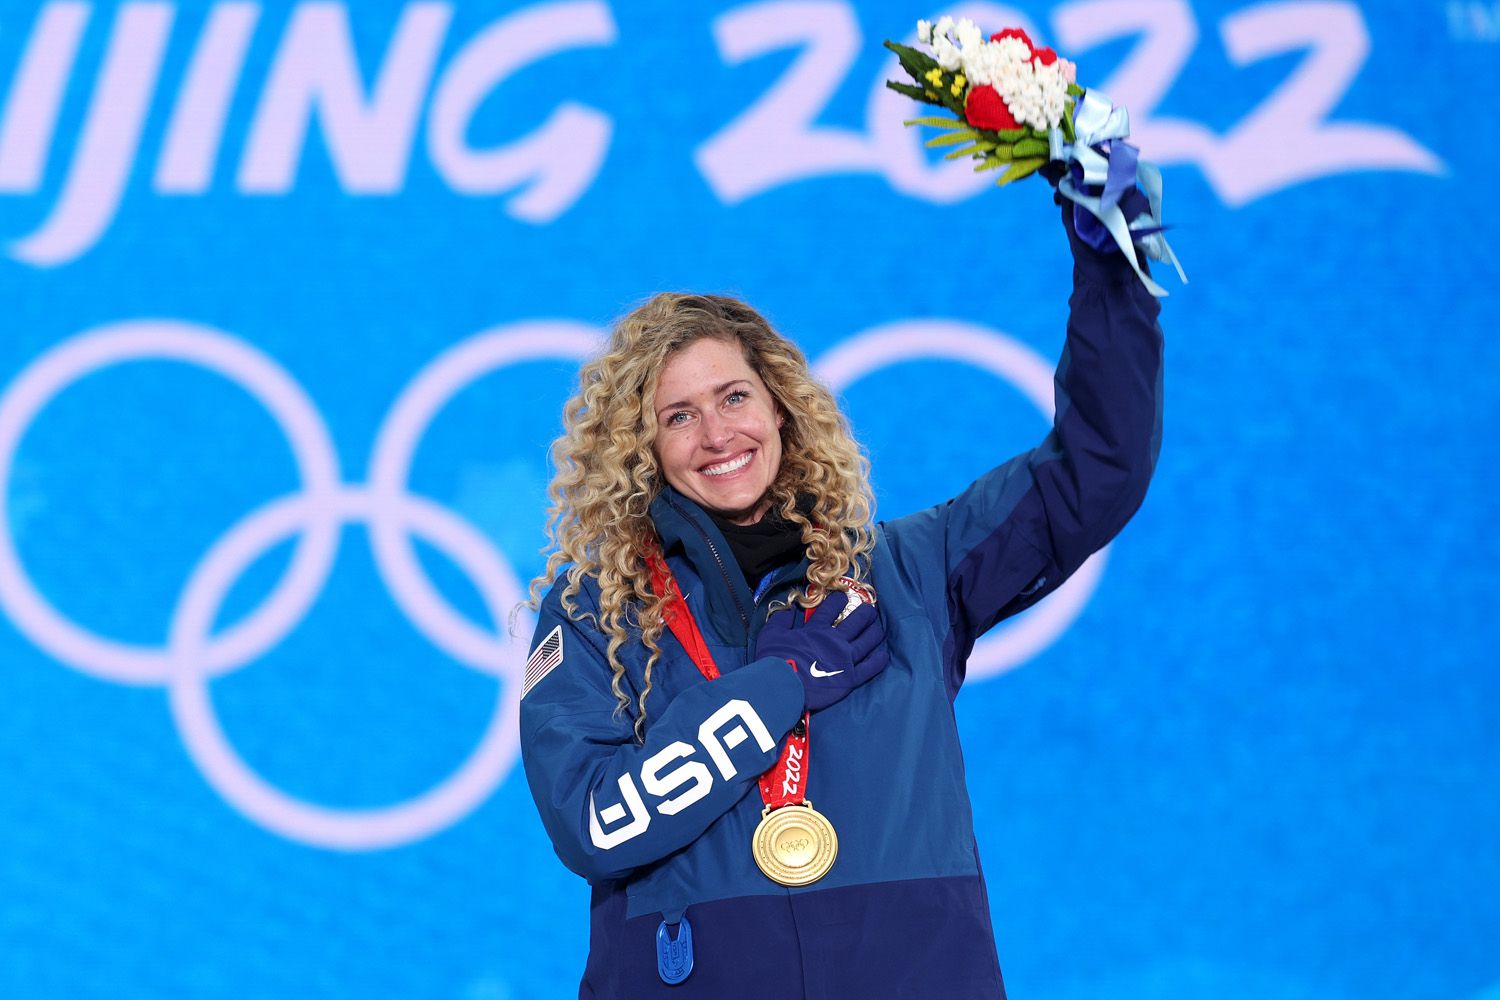 Snowboarder Lindsey Jacobellis Wins First US Gold at Winter Olympics | PEOPLE.com